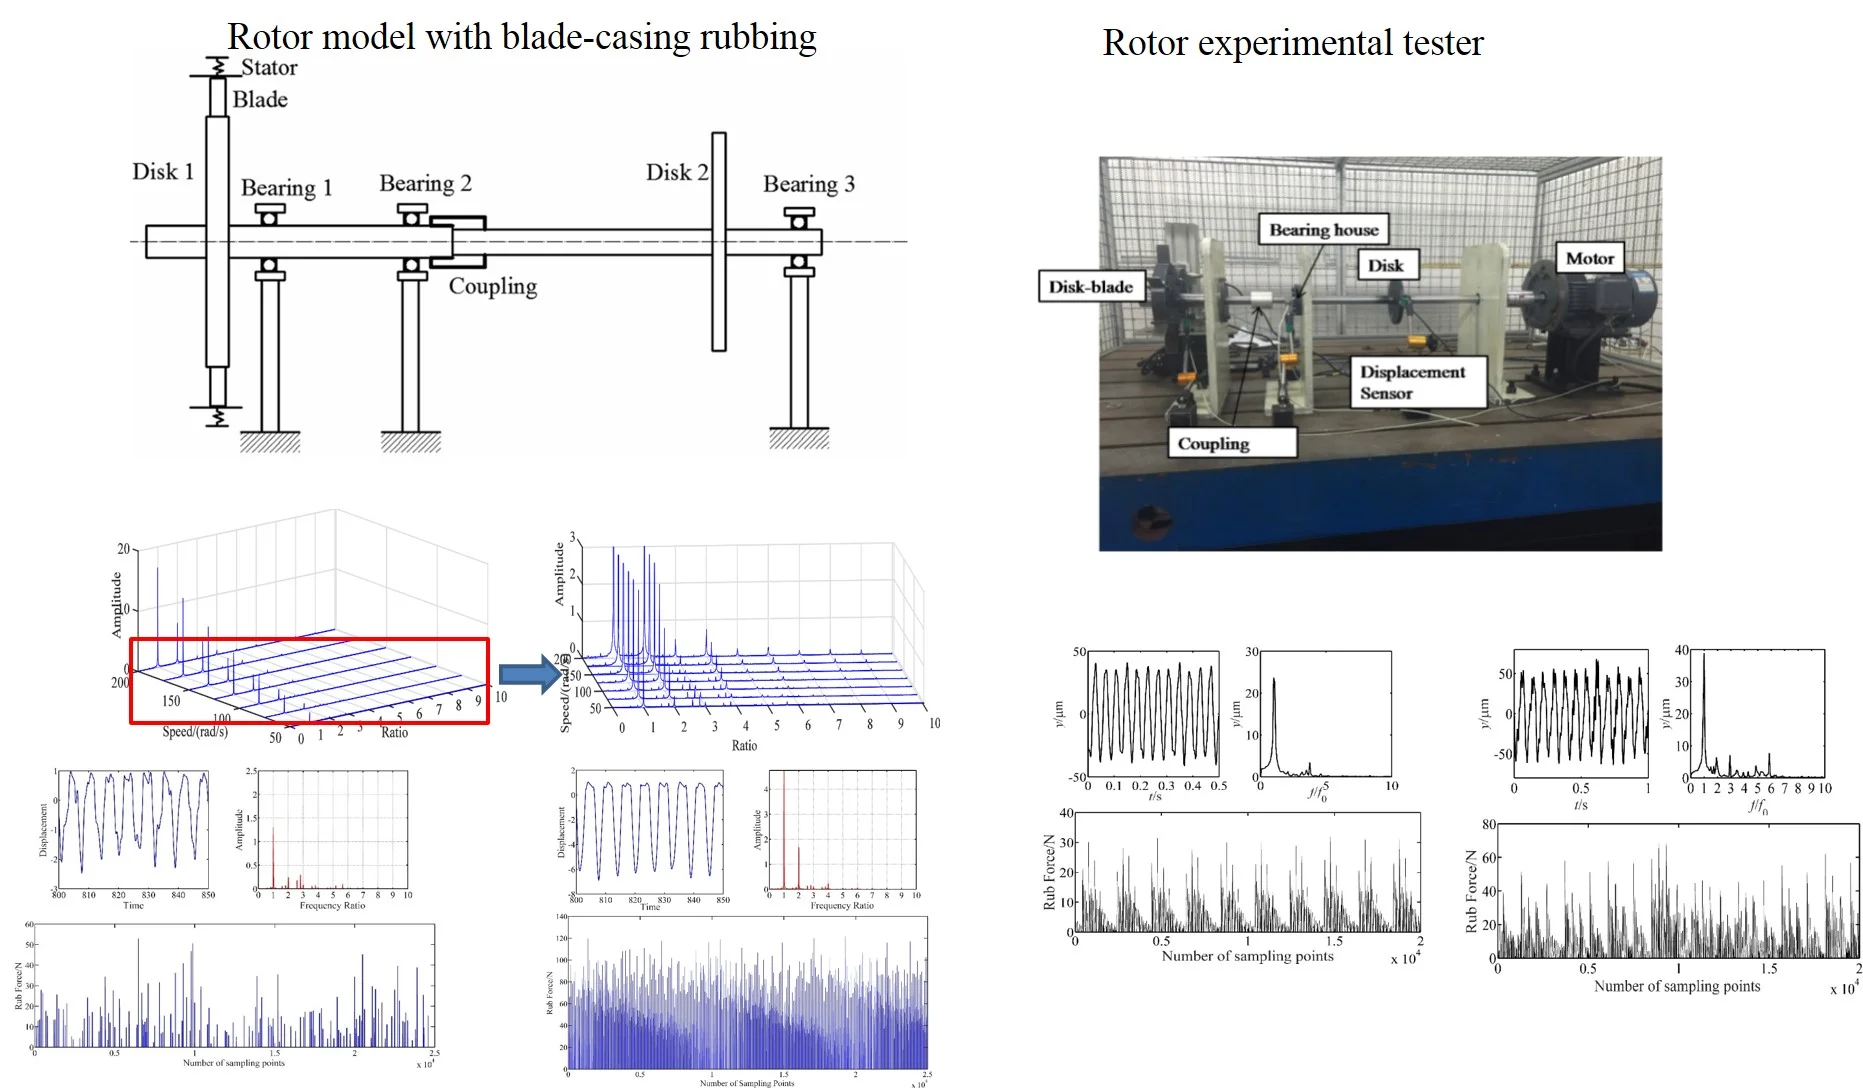 Vibration investigation of rotor system with unbalance and blade-casing rubbing coupling faults